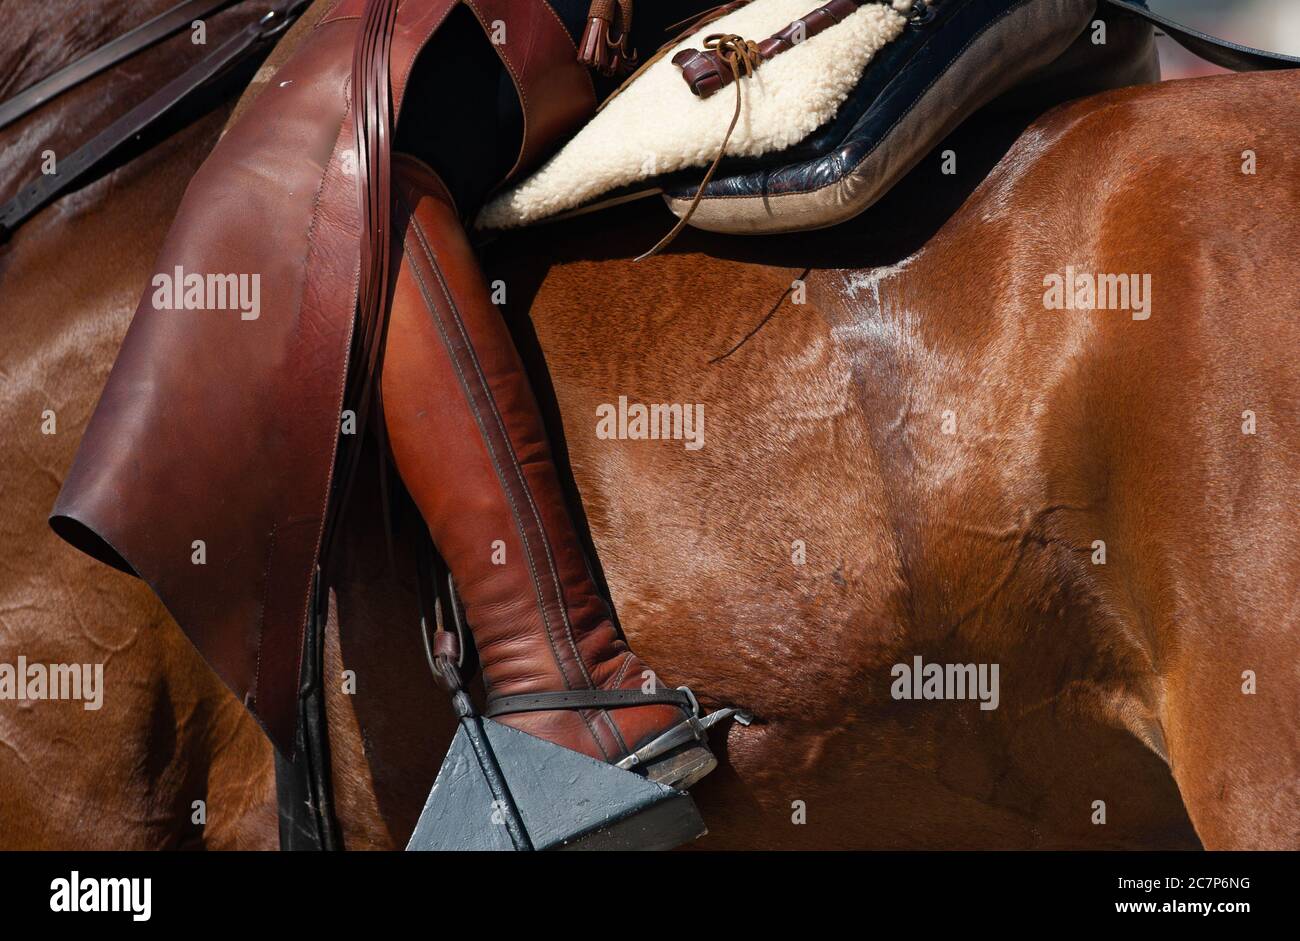 Horse and rider closeup, view on leg and partly saddle Stock Photo